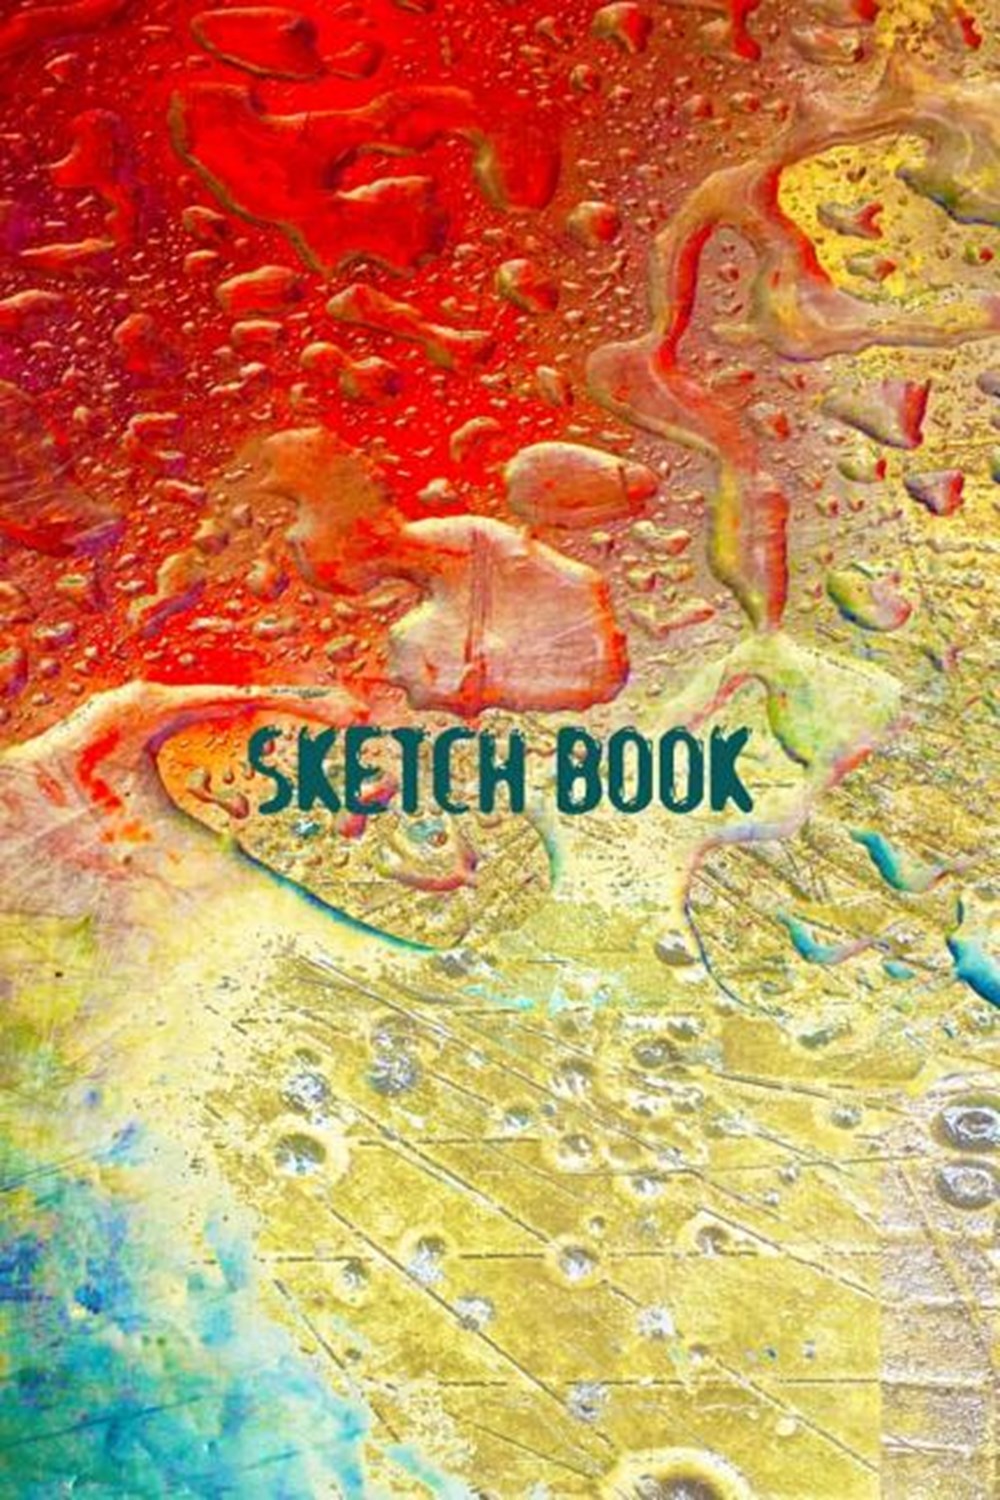 Sketch Book 6" X 9", Personalized Artist Sketchbook: 150 pages, Sketching, Drawing and Creative Dood